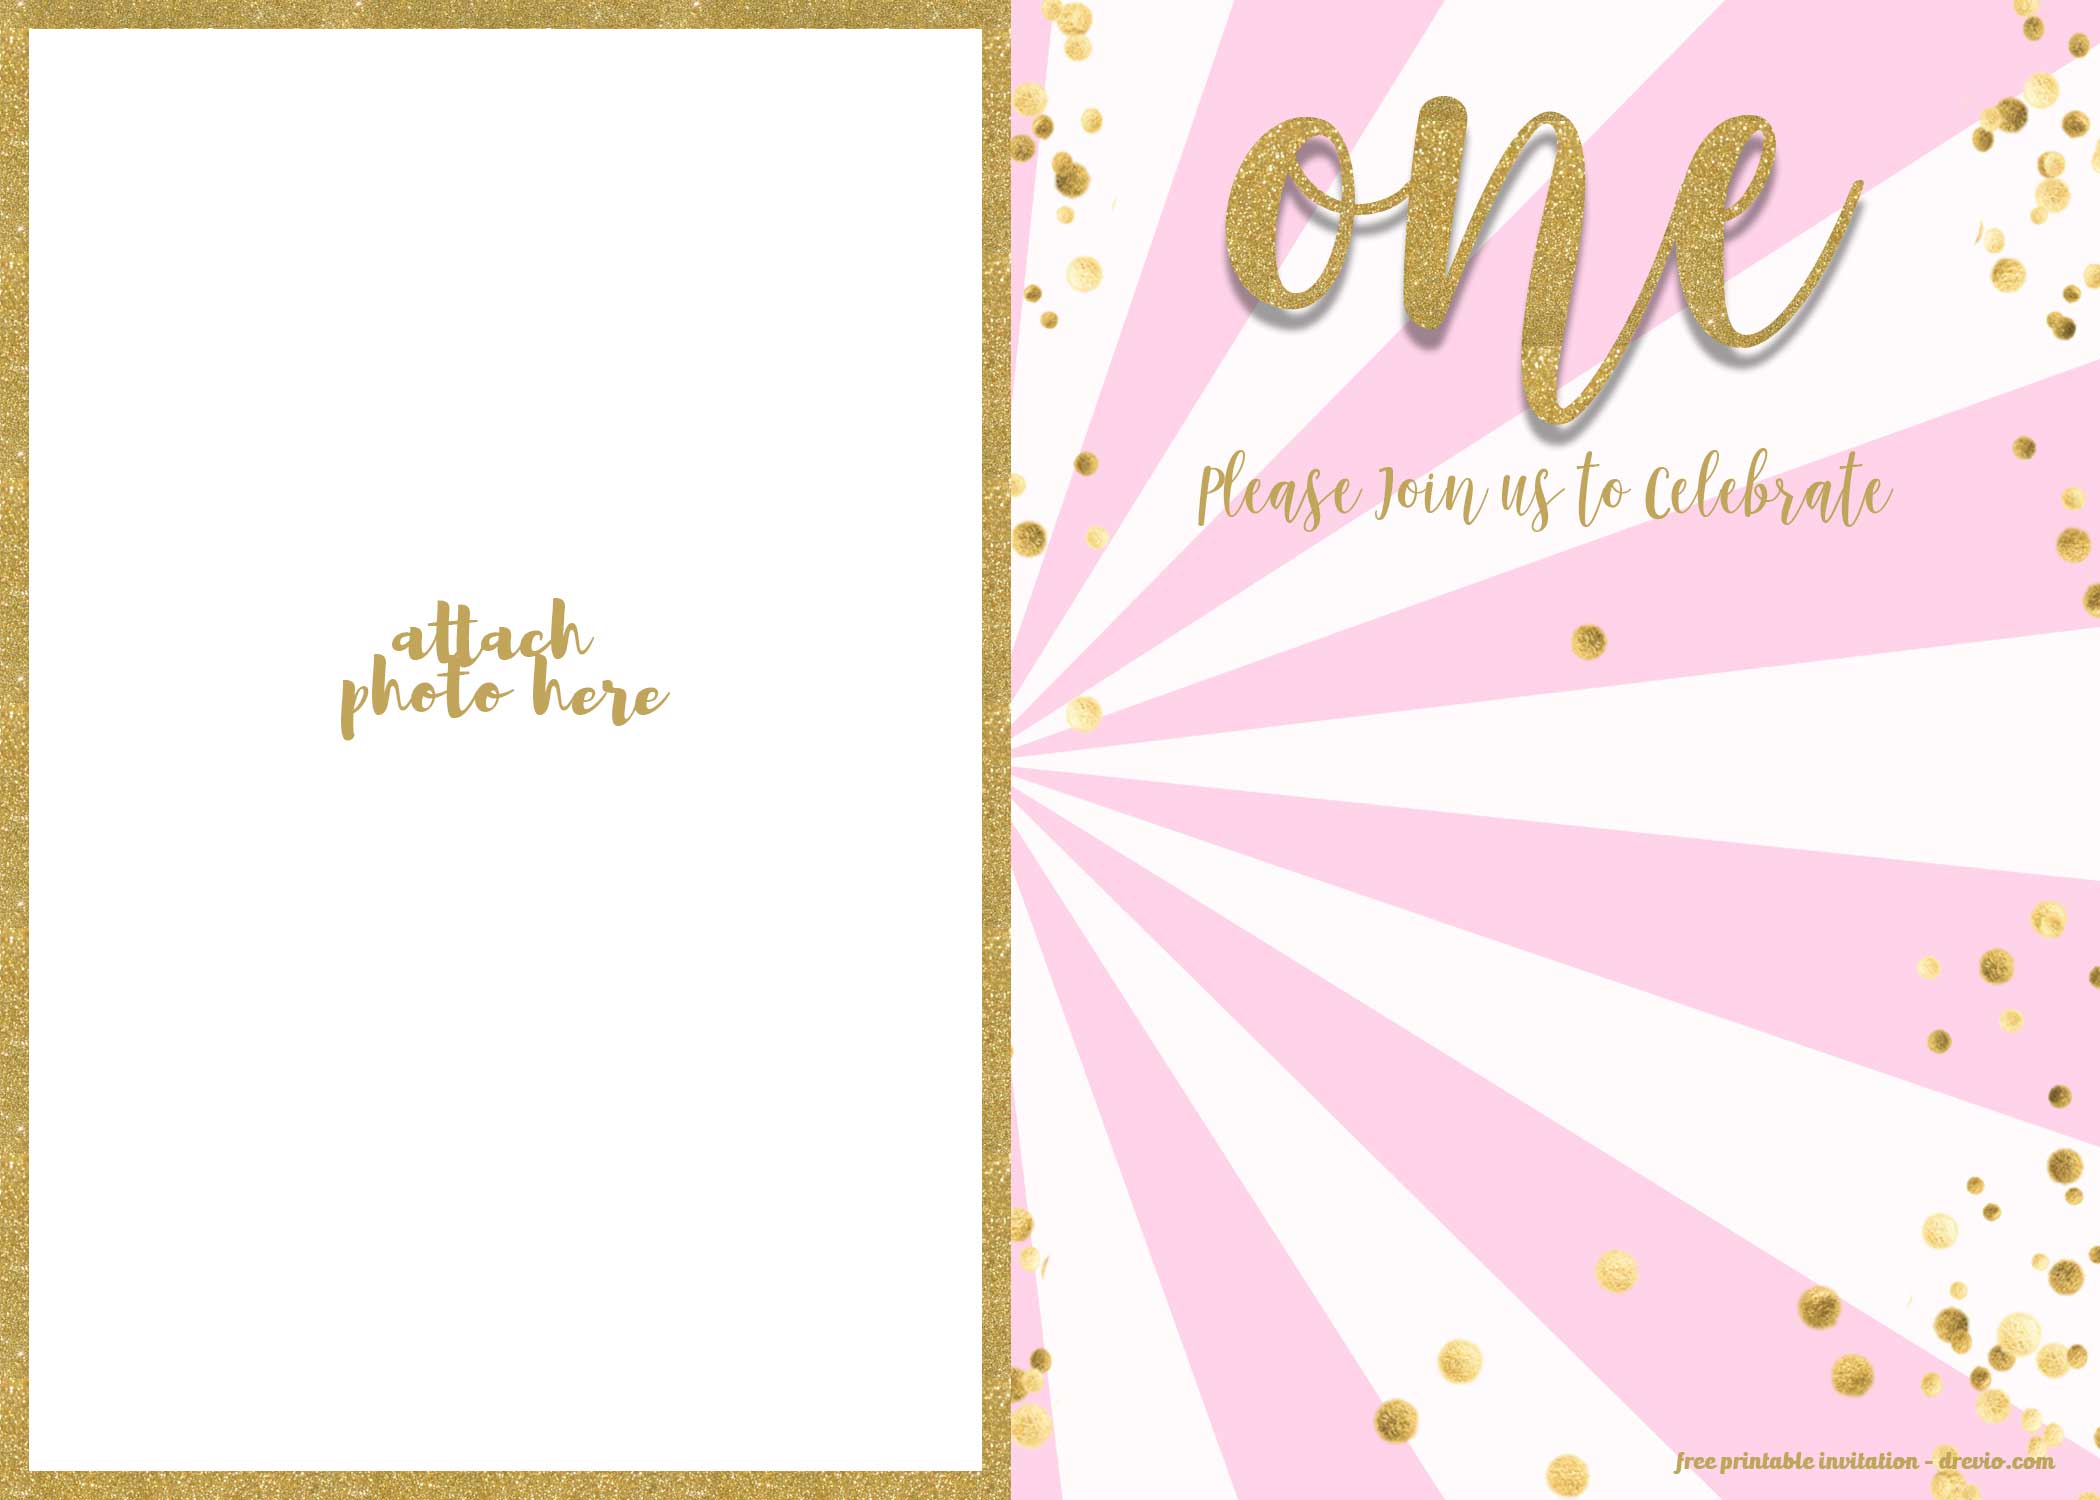 FREE 1st Birthday Invitations Template For Girl FREE Printable Birthday Invitation Templates